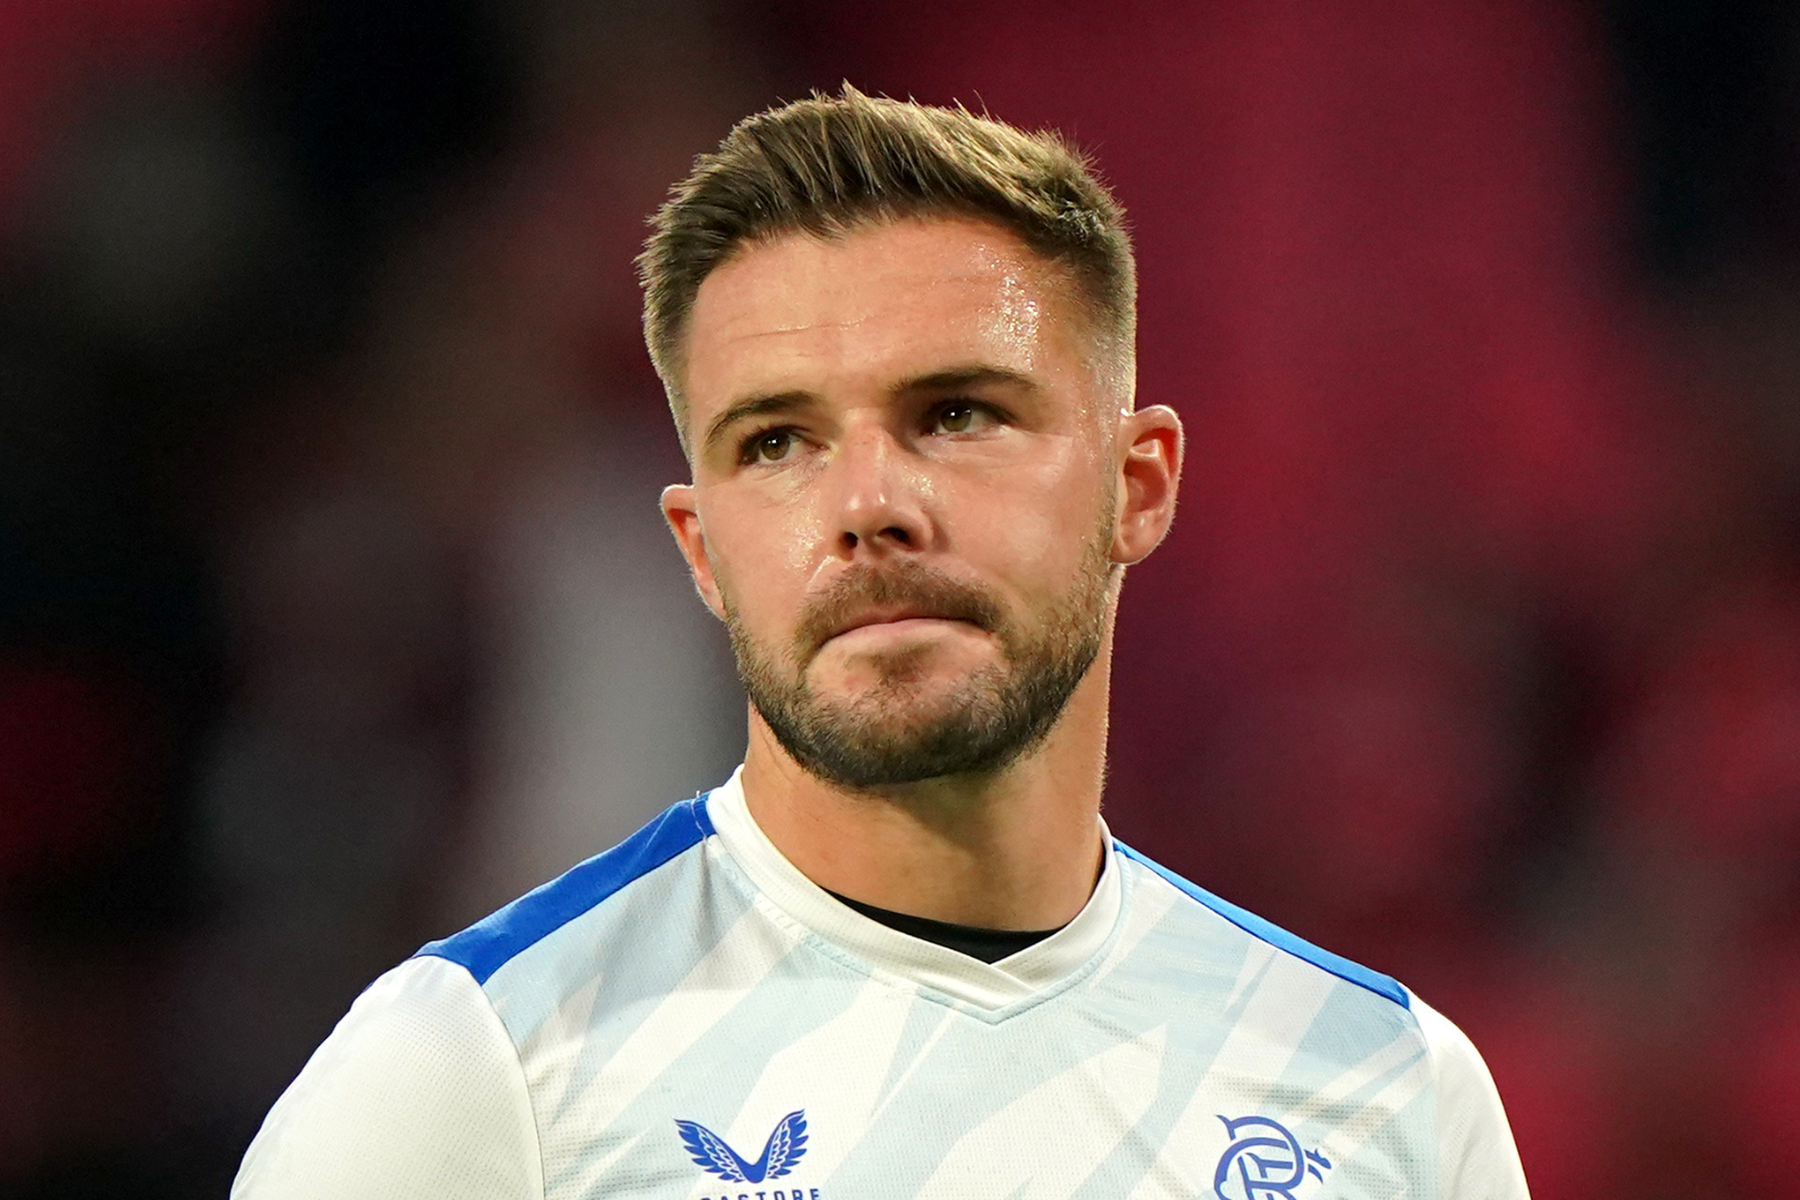 Butland on fatal flaw Rangers must fix to beat Celtic for cup double